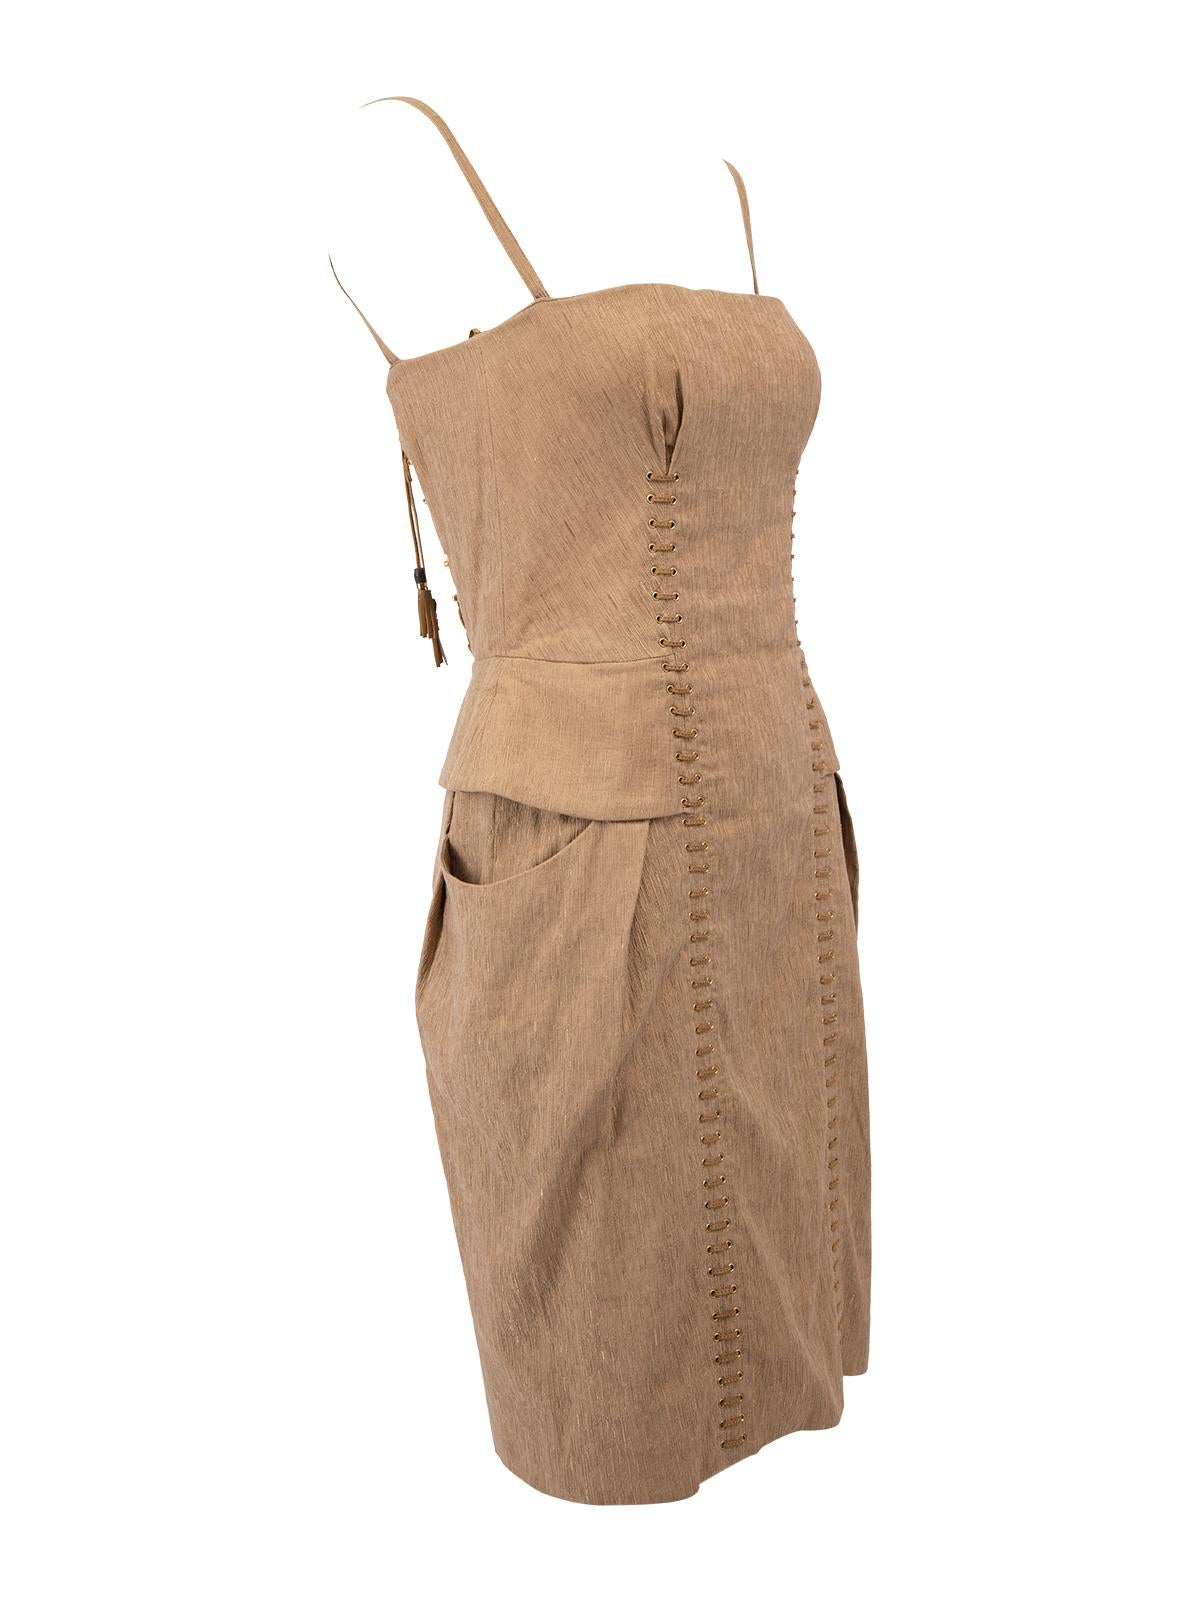 CONDITION is Very good. Minimal wear to dress is evident. Minimal wear to the outer cotton fabric where loose thread can be seen on the lining on this used Gucci designer resale item. Details Beige Cotton Mini dress Bodycon Spaghetti strap